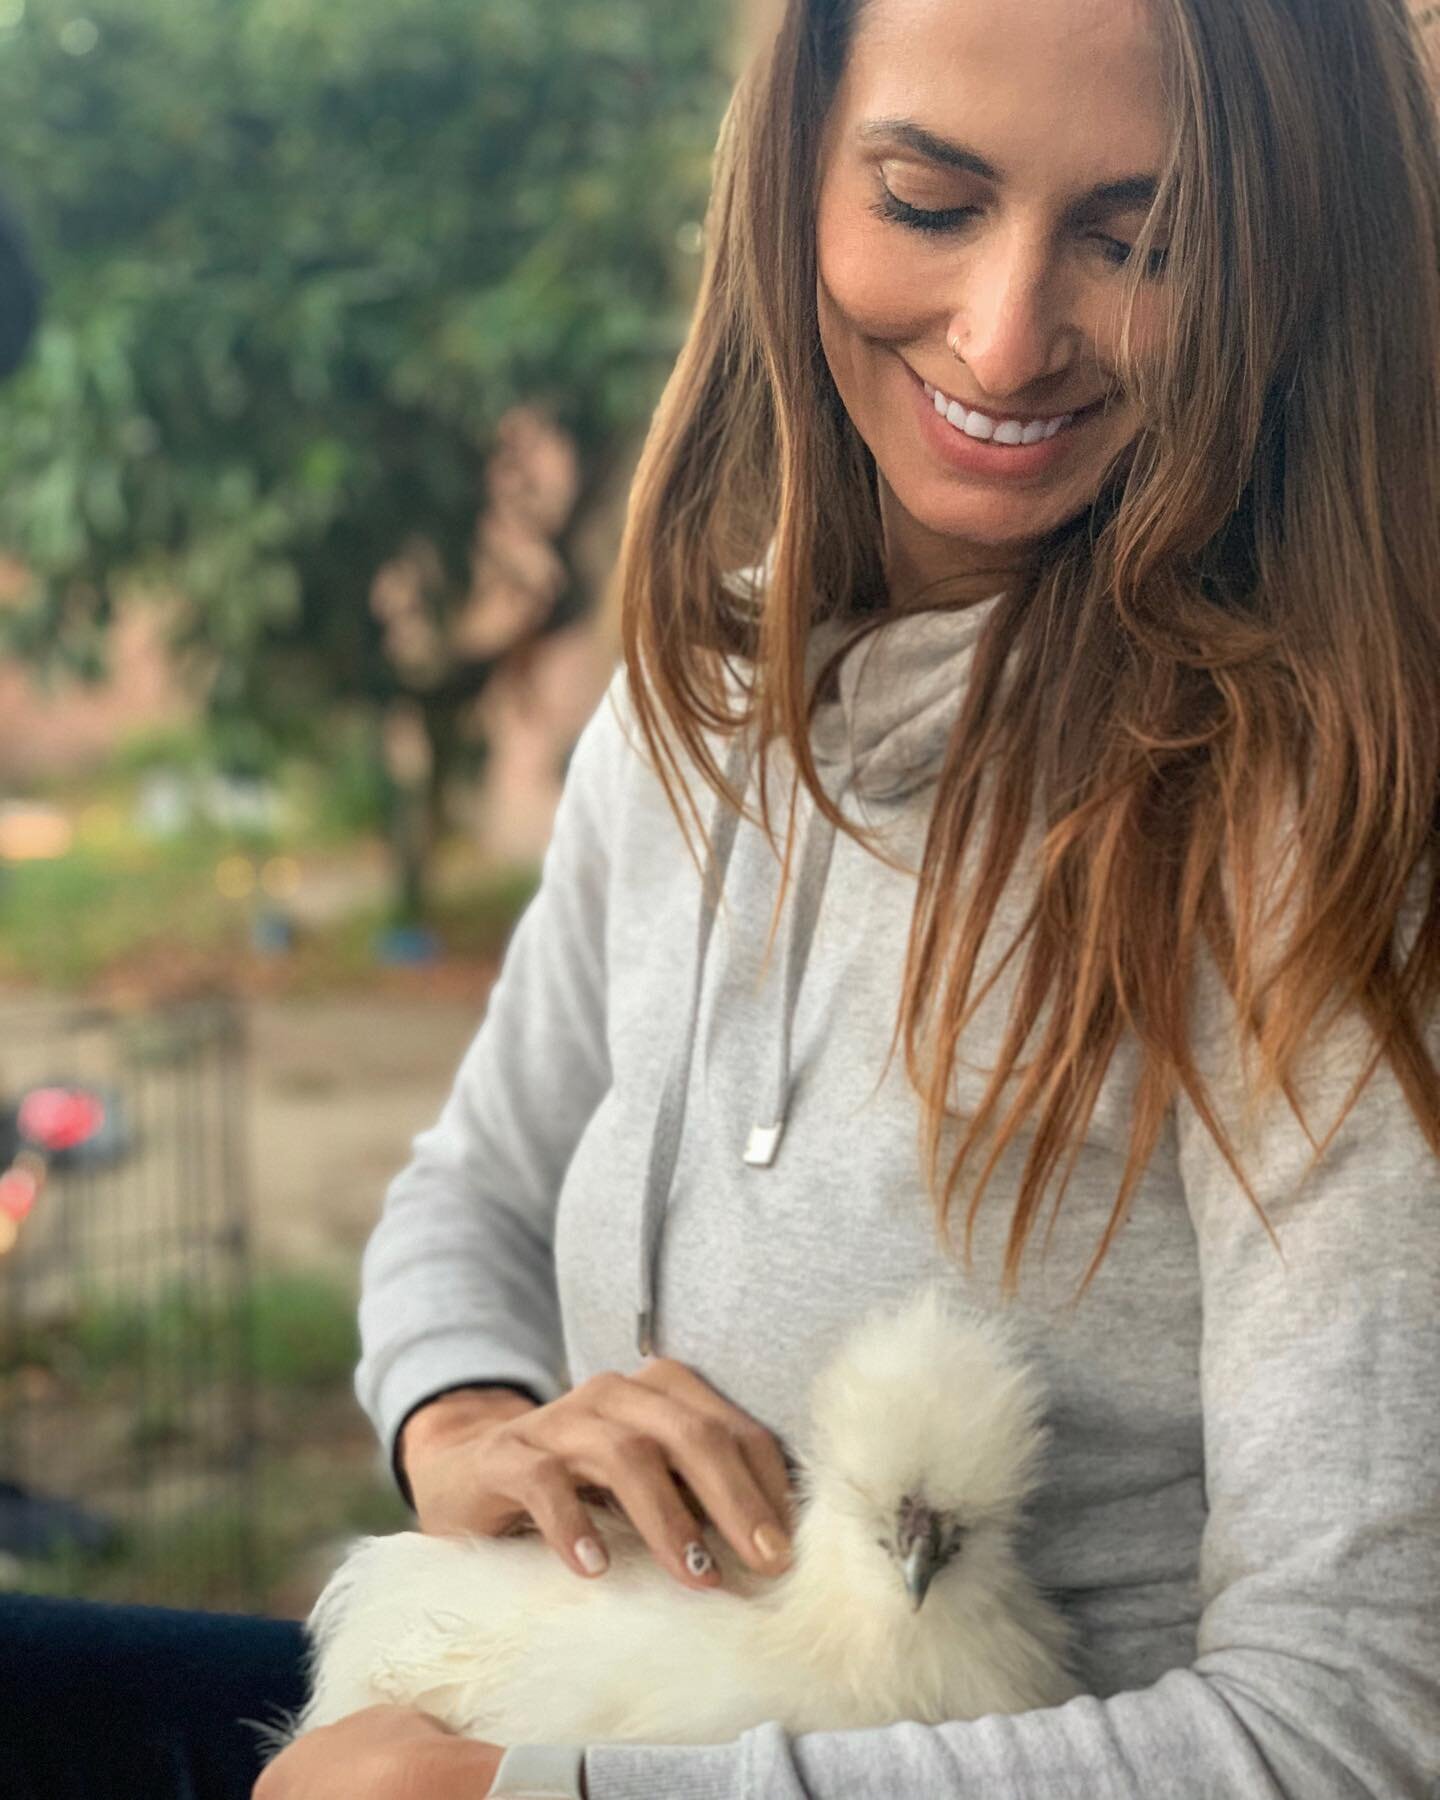 This week we added a few little girls to the family 💕 Meet Dorothy, Rose &amp; Blanche ✨Our Golden Girls✨thank you so much for letting me adopt these babies @mrbellock 🙏🏼🐓🐓🐓 #chickenmama #govegan